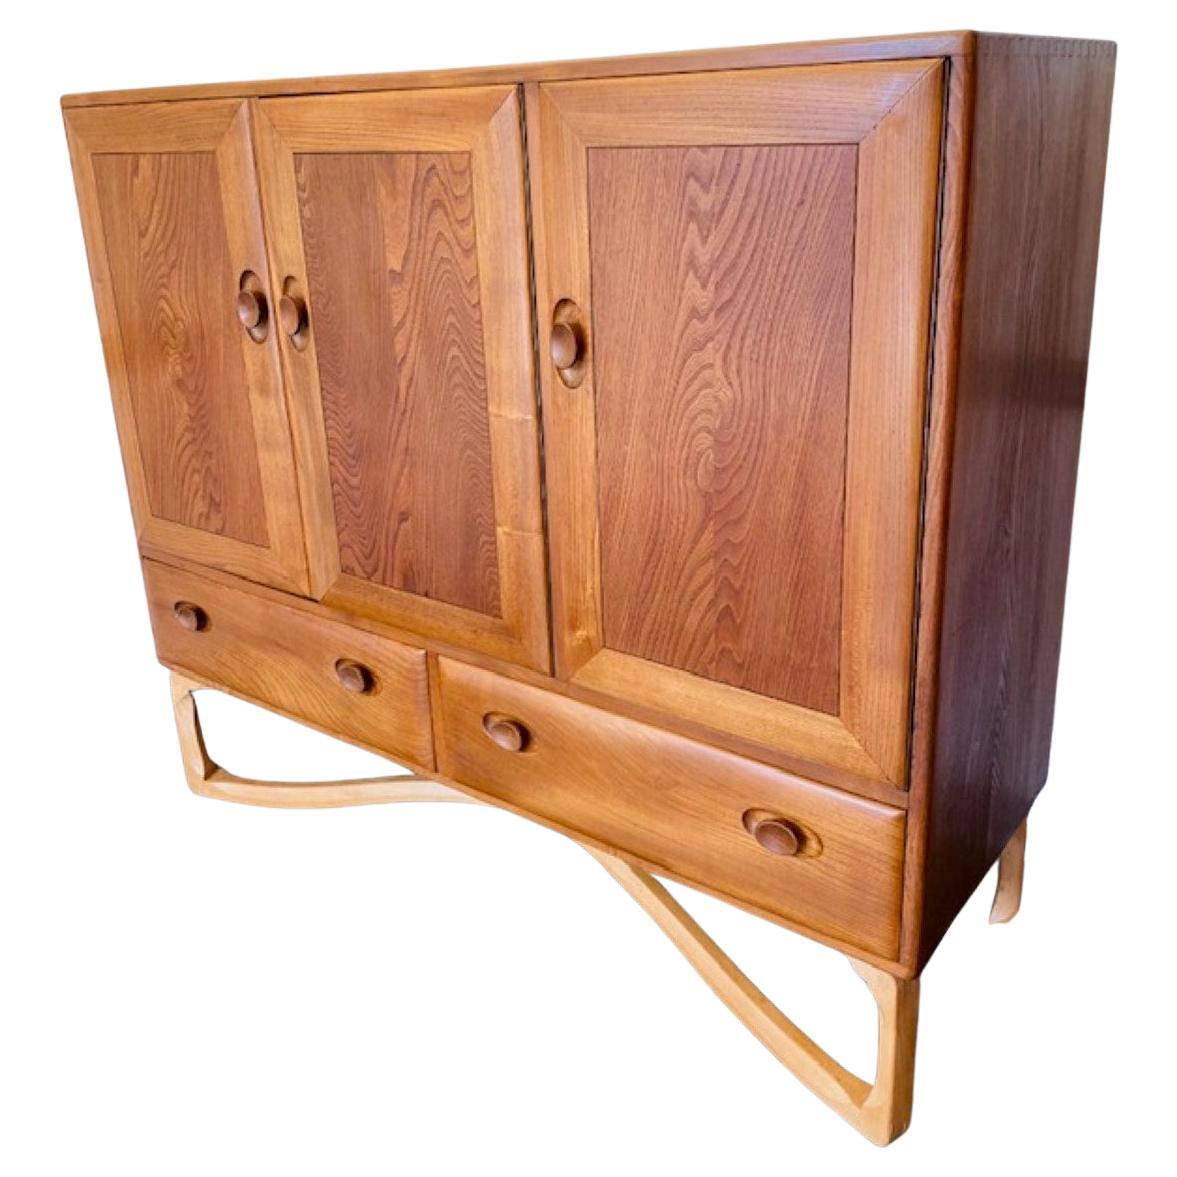 Rare Ercol Tall Sideboard / Drinks Cabinet, English, by Lucian Ercolani, 1960s For Sale